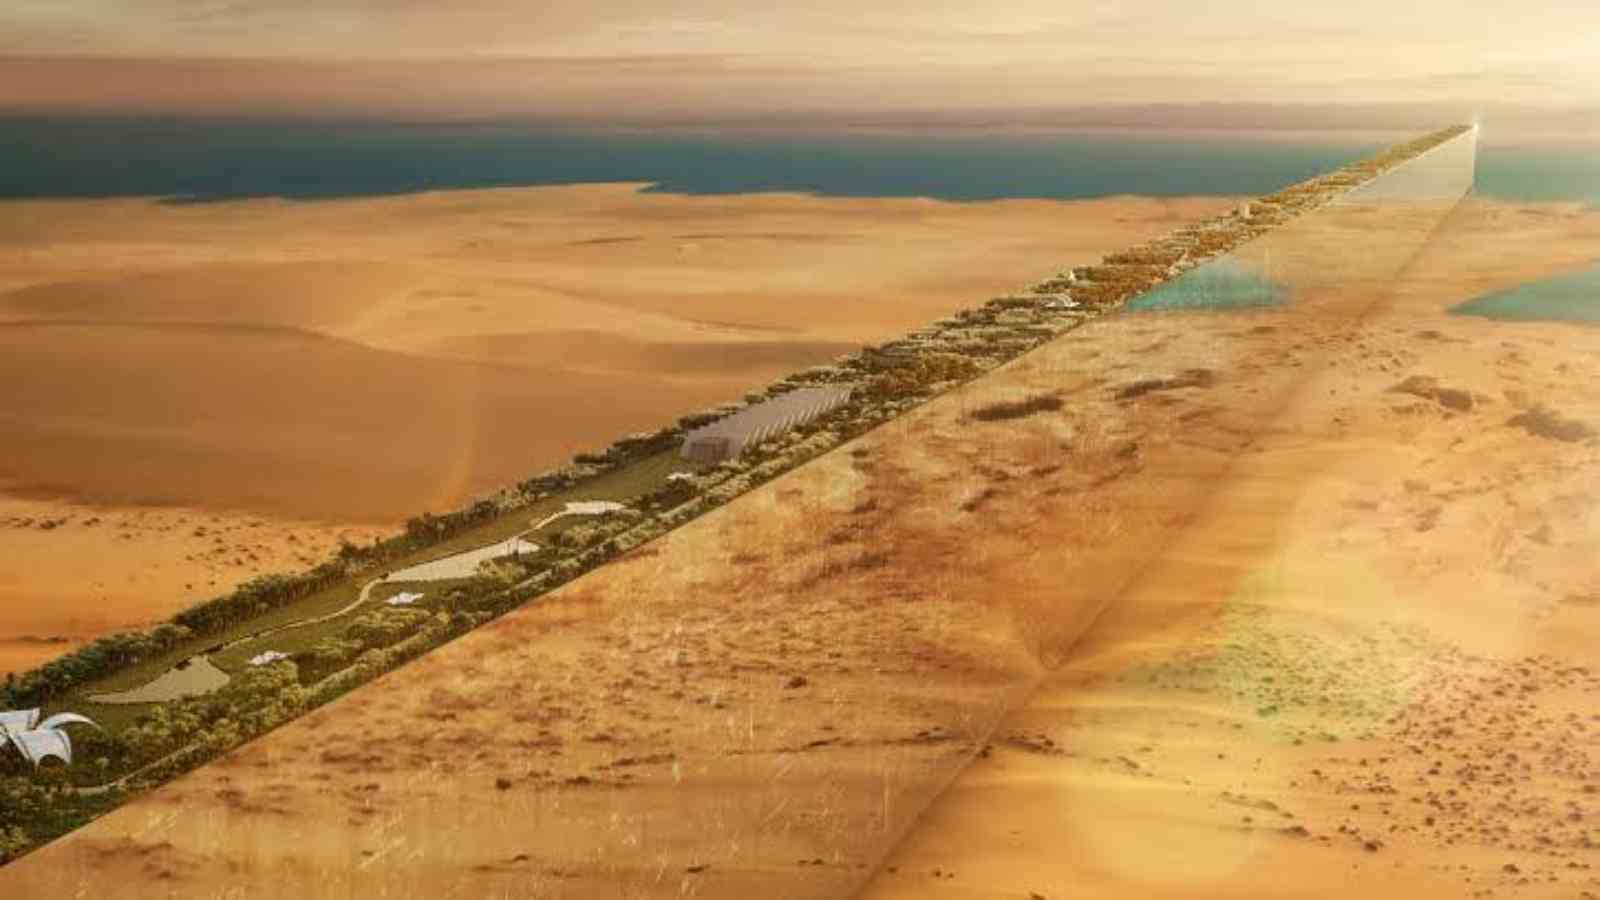 The Neom Project is aiming for zero carbon emissions and a sustainable living